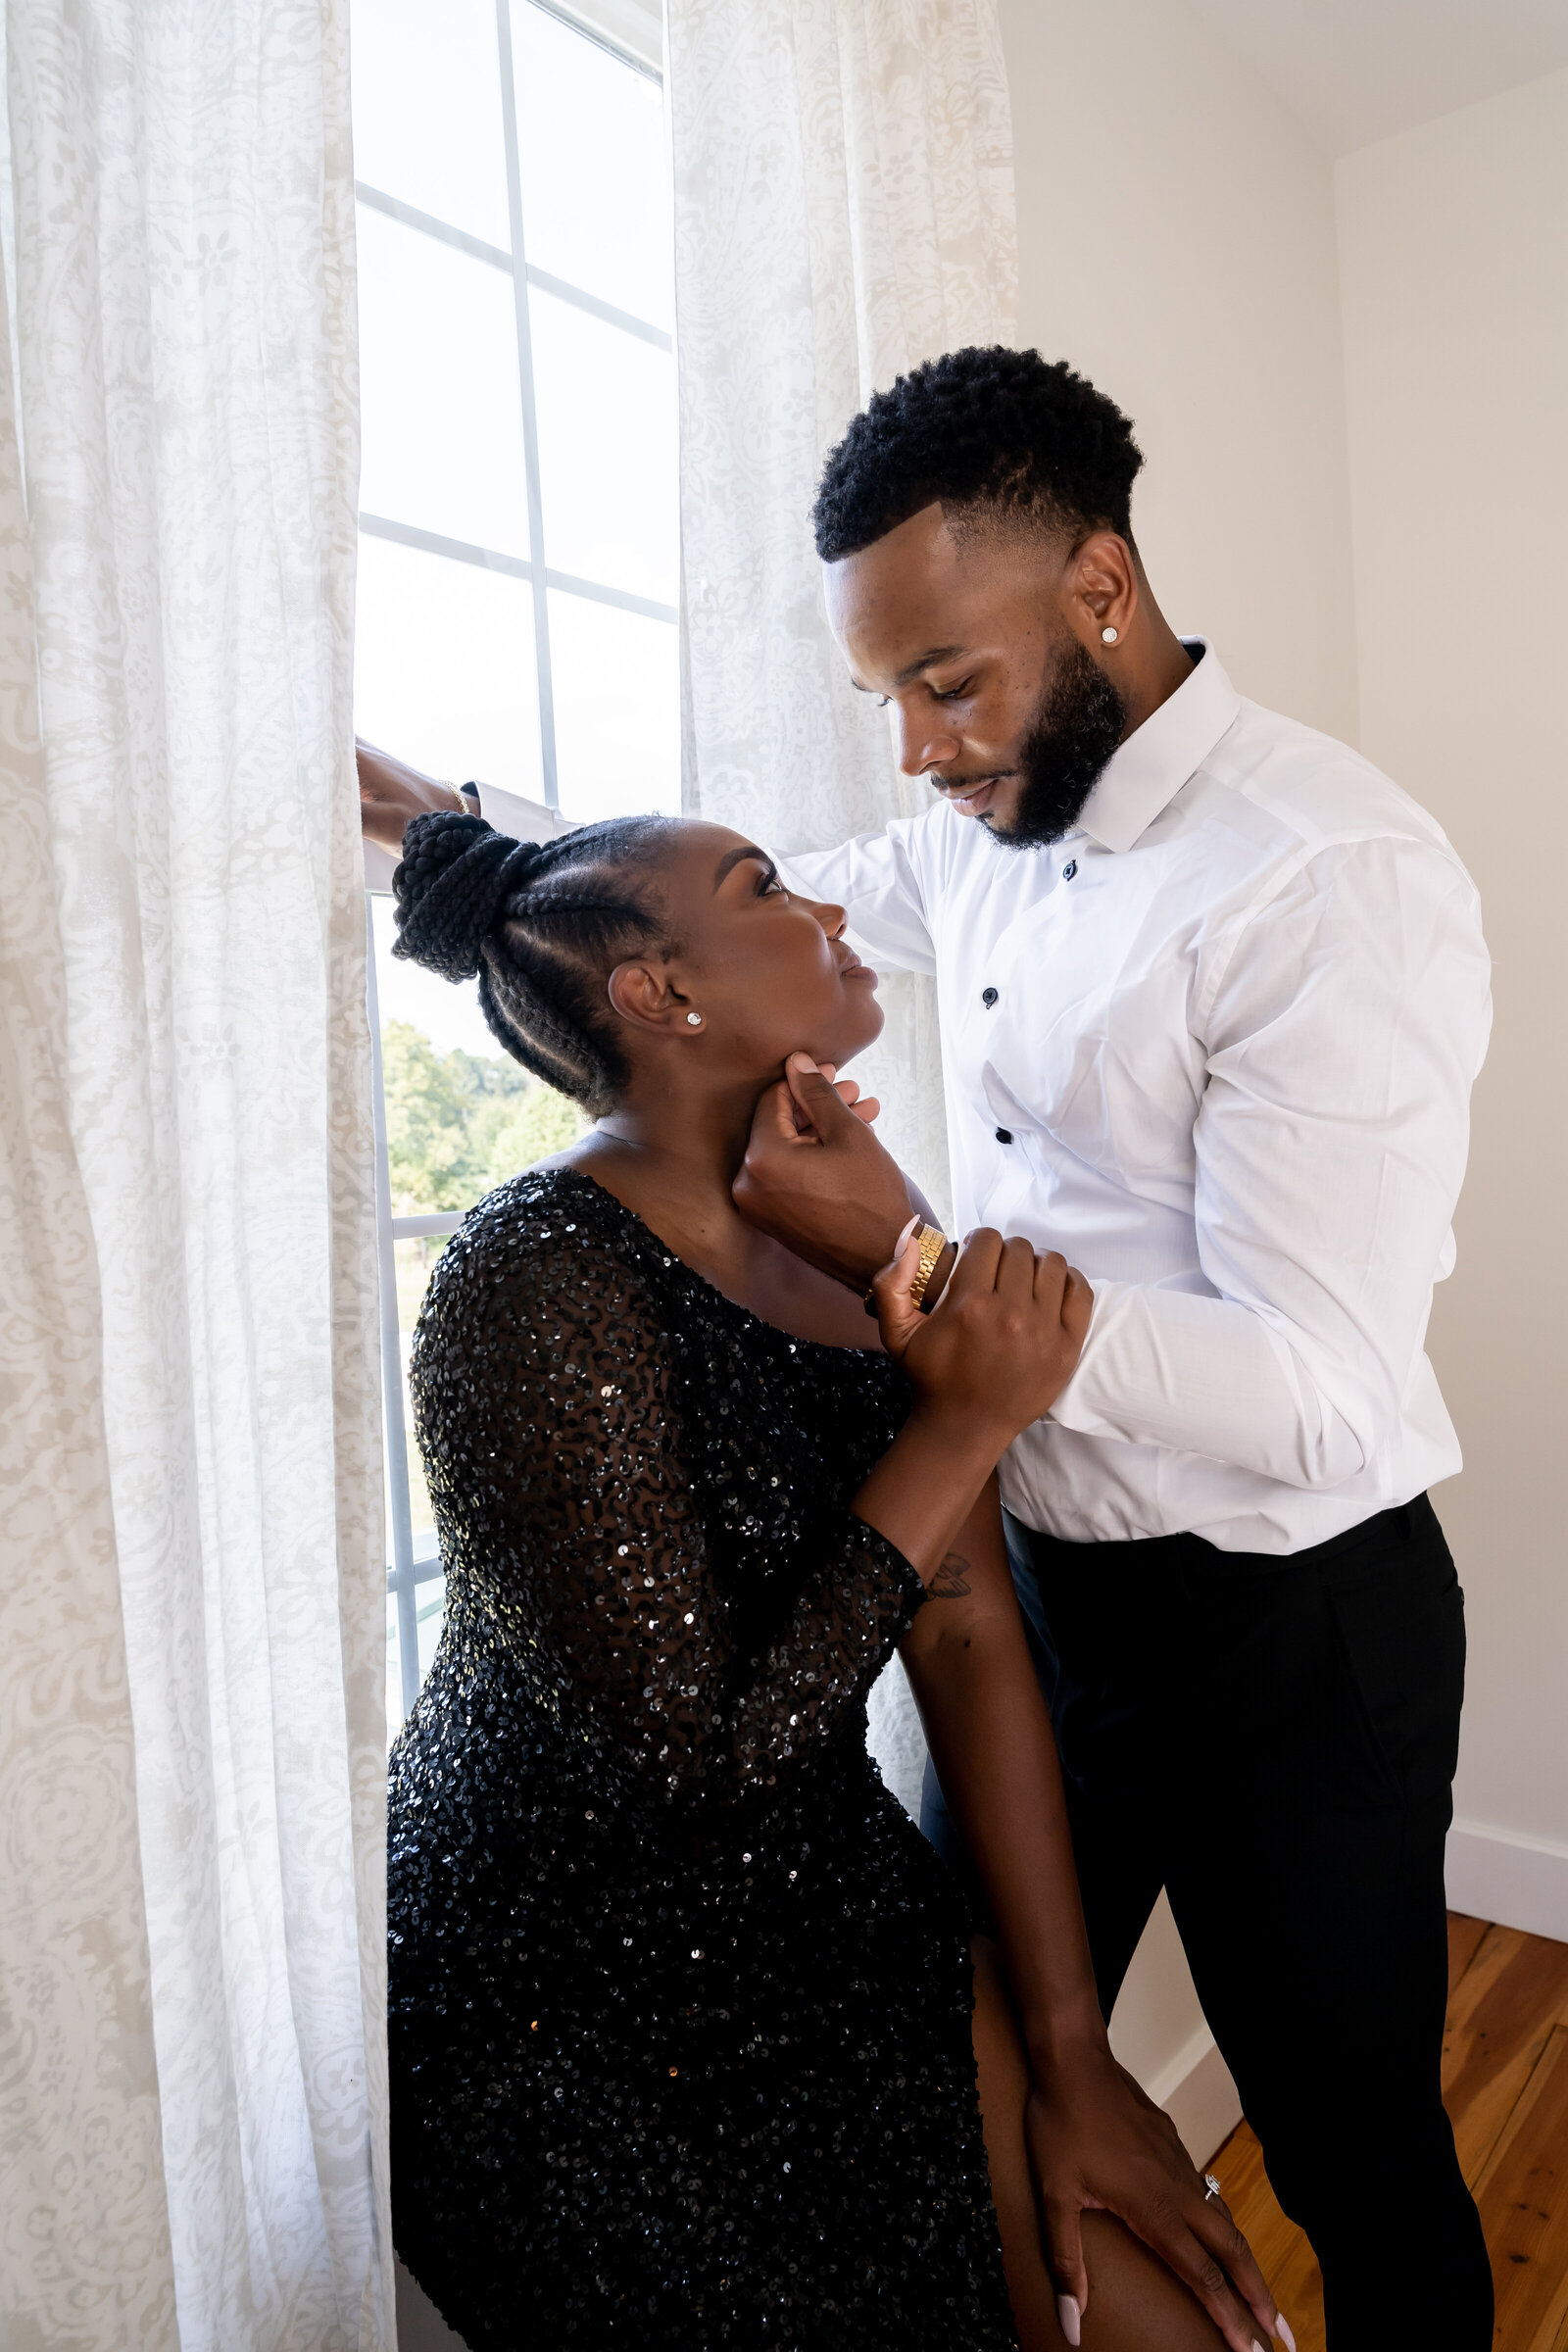 Engagement photoshoot, man wearing black and white suit, woman wearing black sequin dress